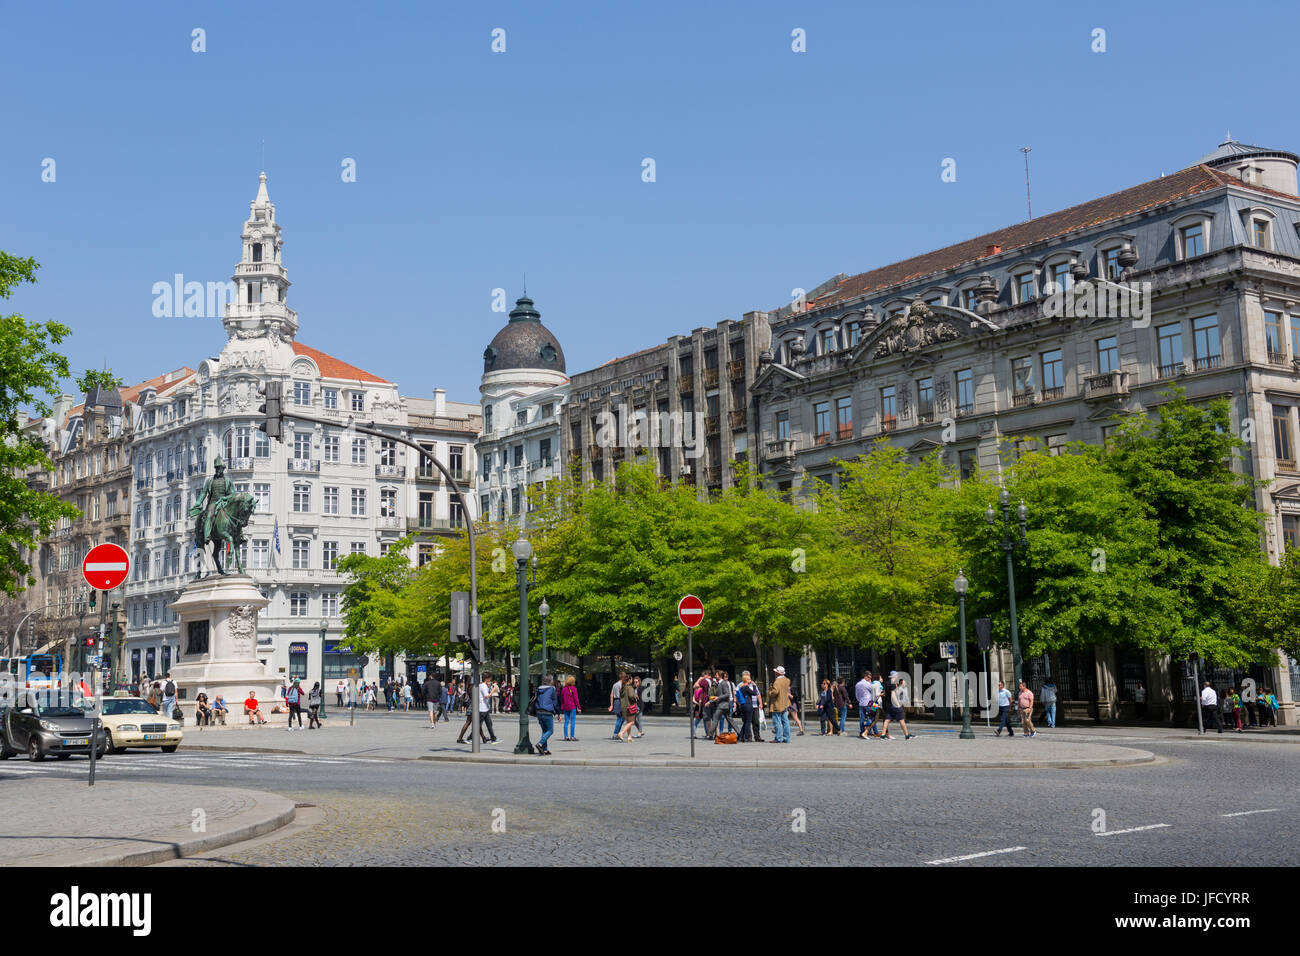 PORTO, PORTUGAL - April 17, 2017: People walking at Old Town streets of Porto. Porto is the famous tourist destiantion in Portugal Stock Photo